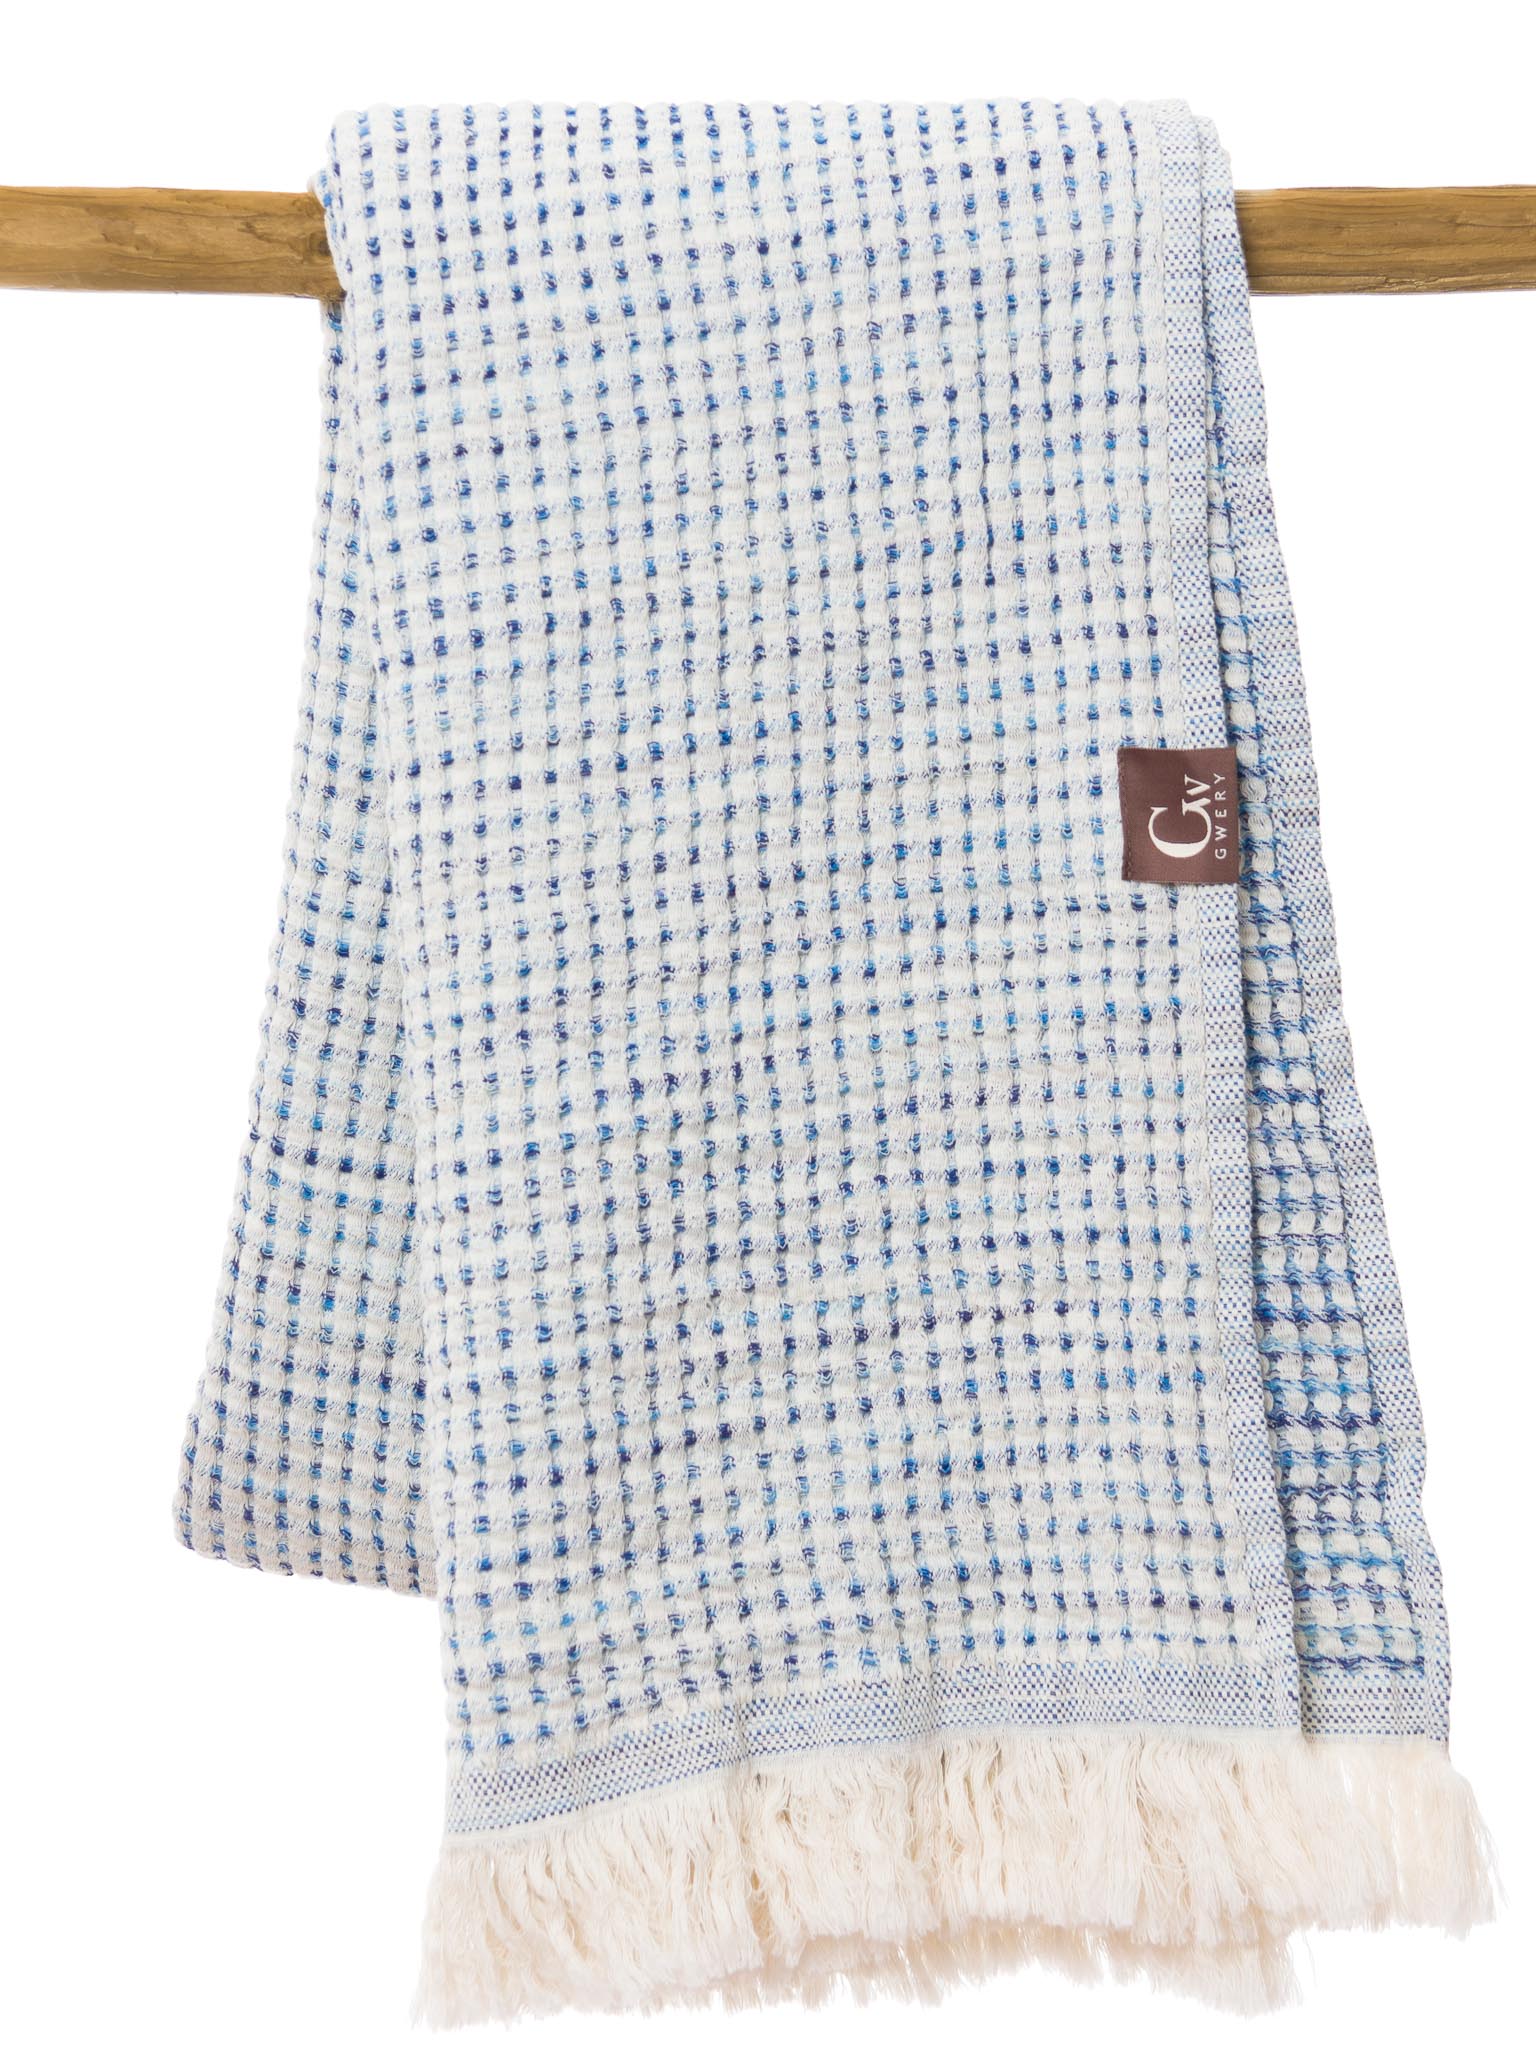 Blue patterned, double sided, honeycomb beach towel folded